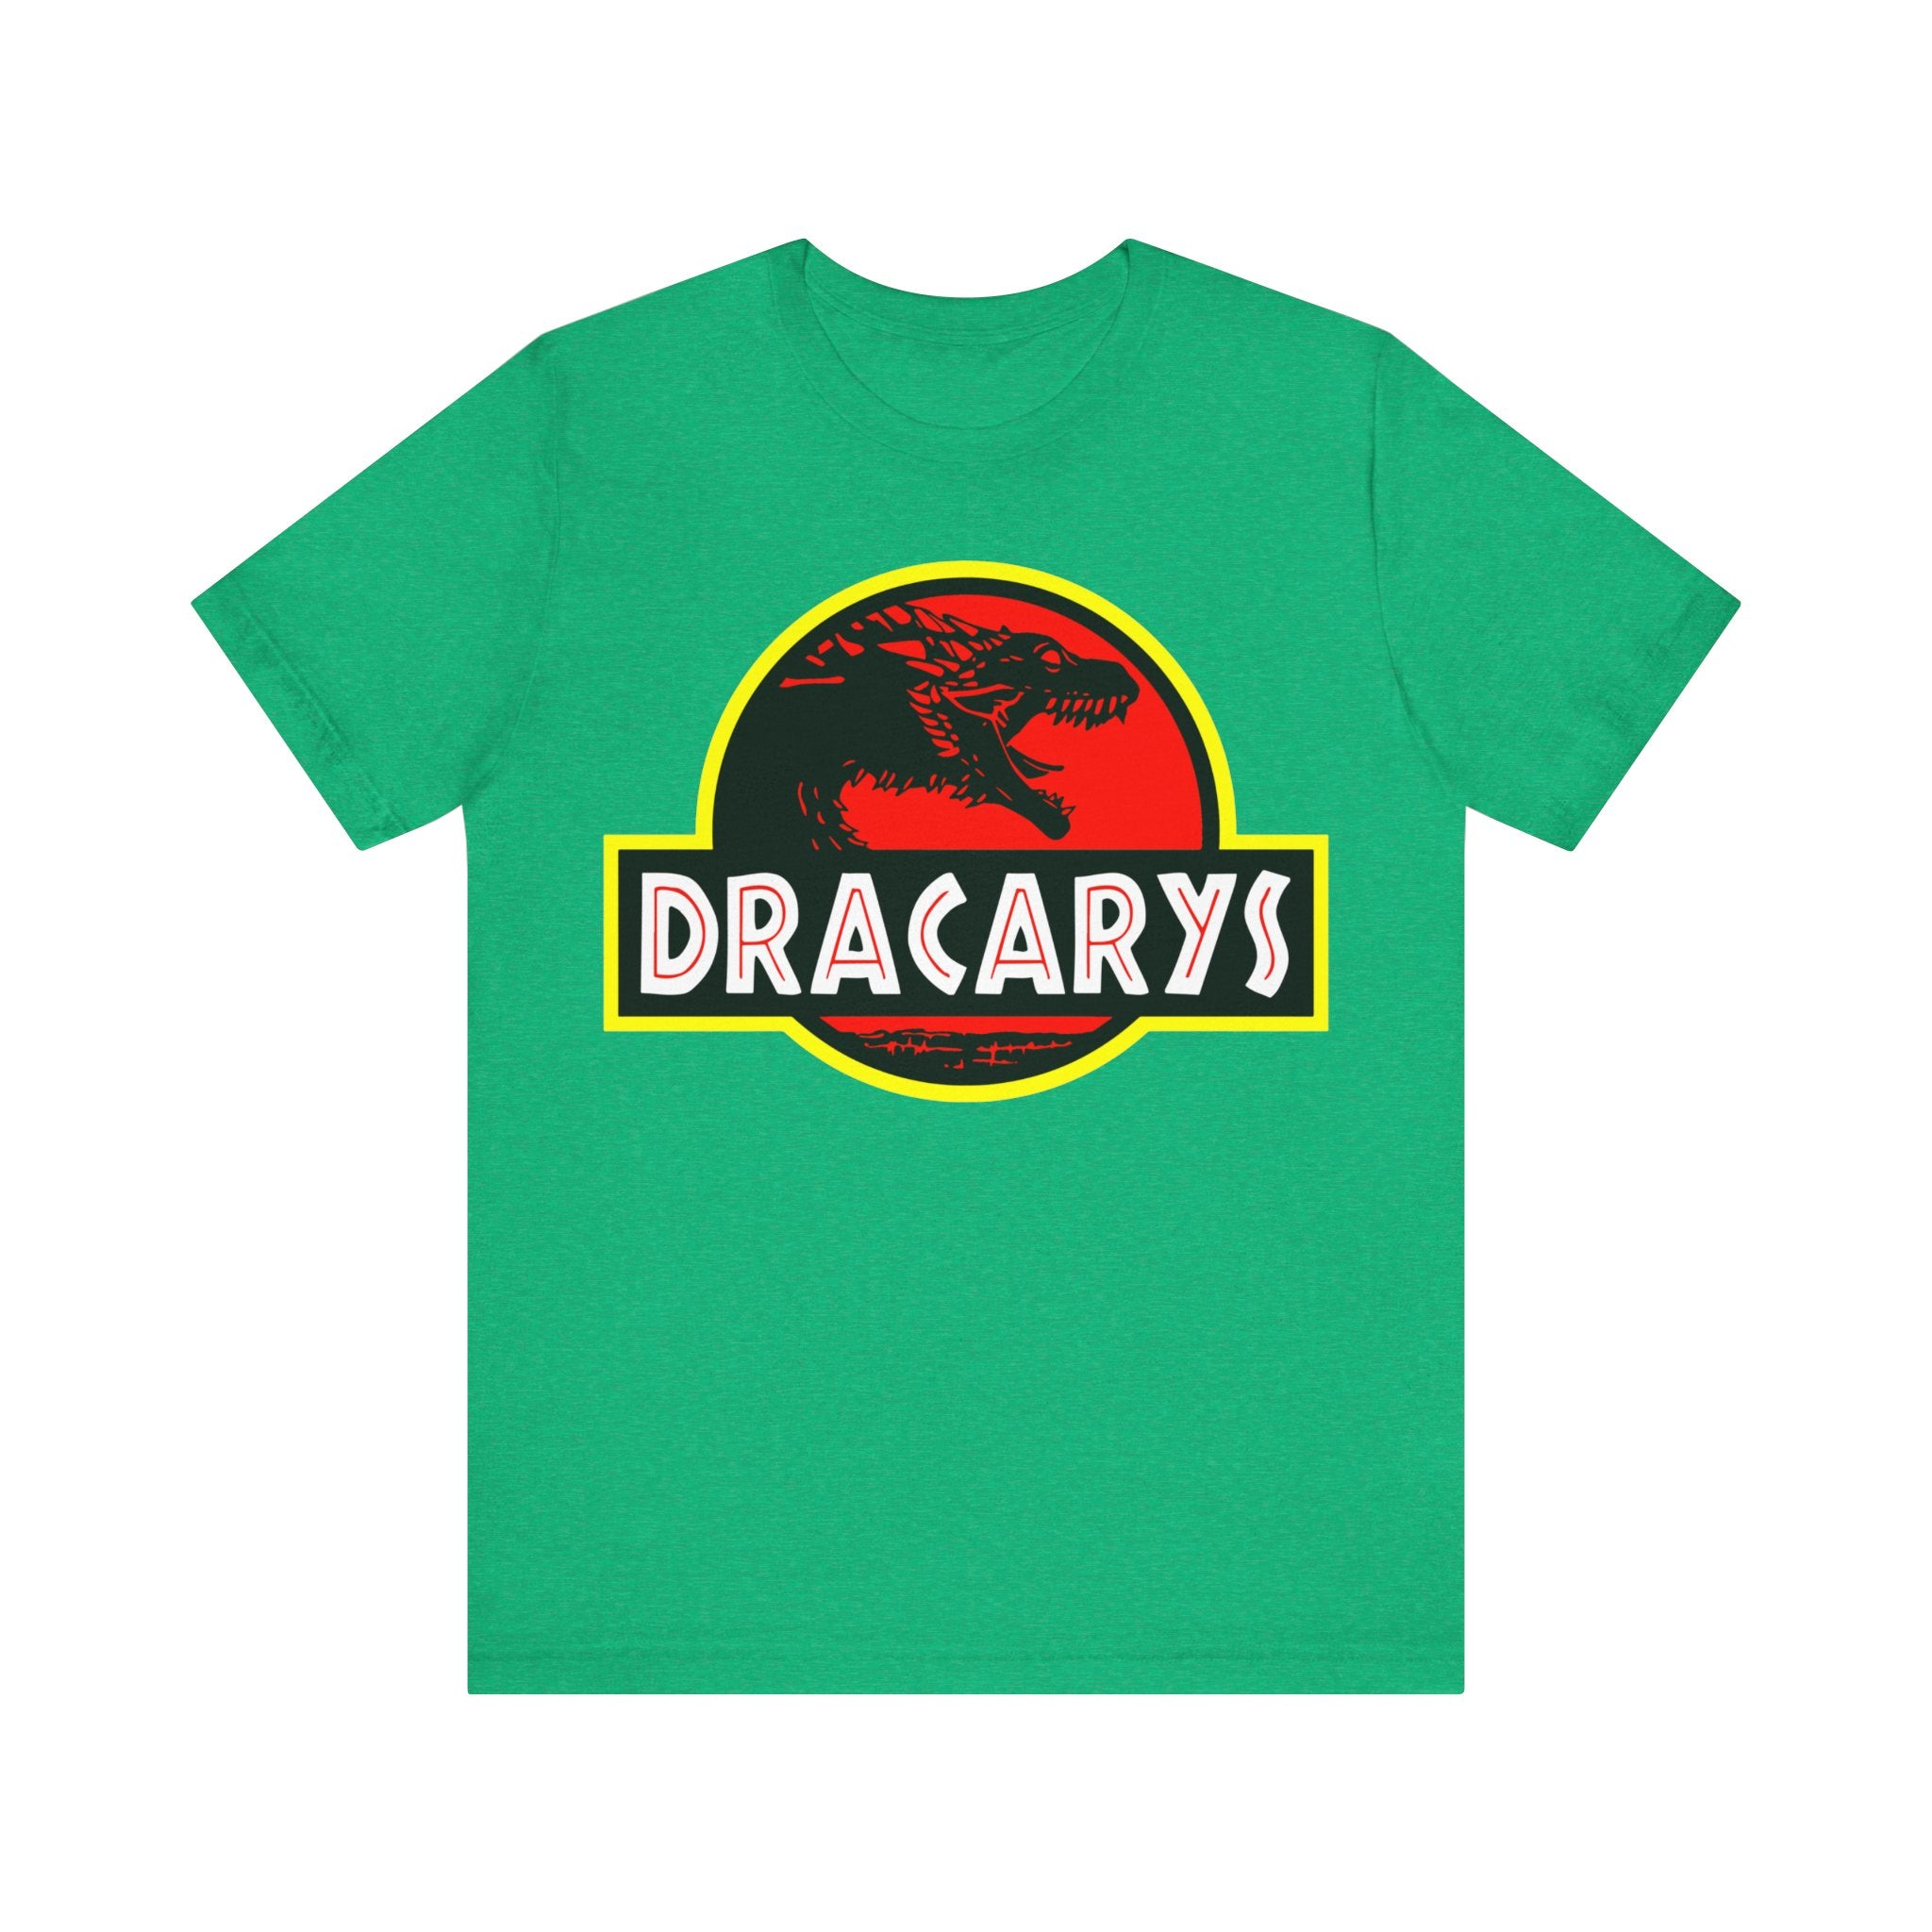 Green Dracarys T-Shirt with a graphic of a black dragon silhouette inside a red circle, and the word "dracarys" in bold yellow letters below on classic tee.